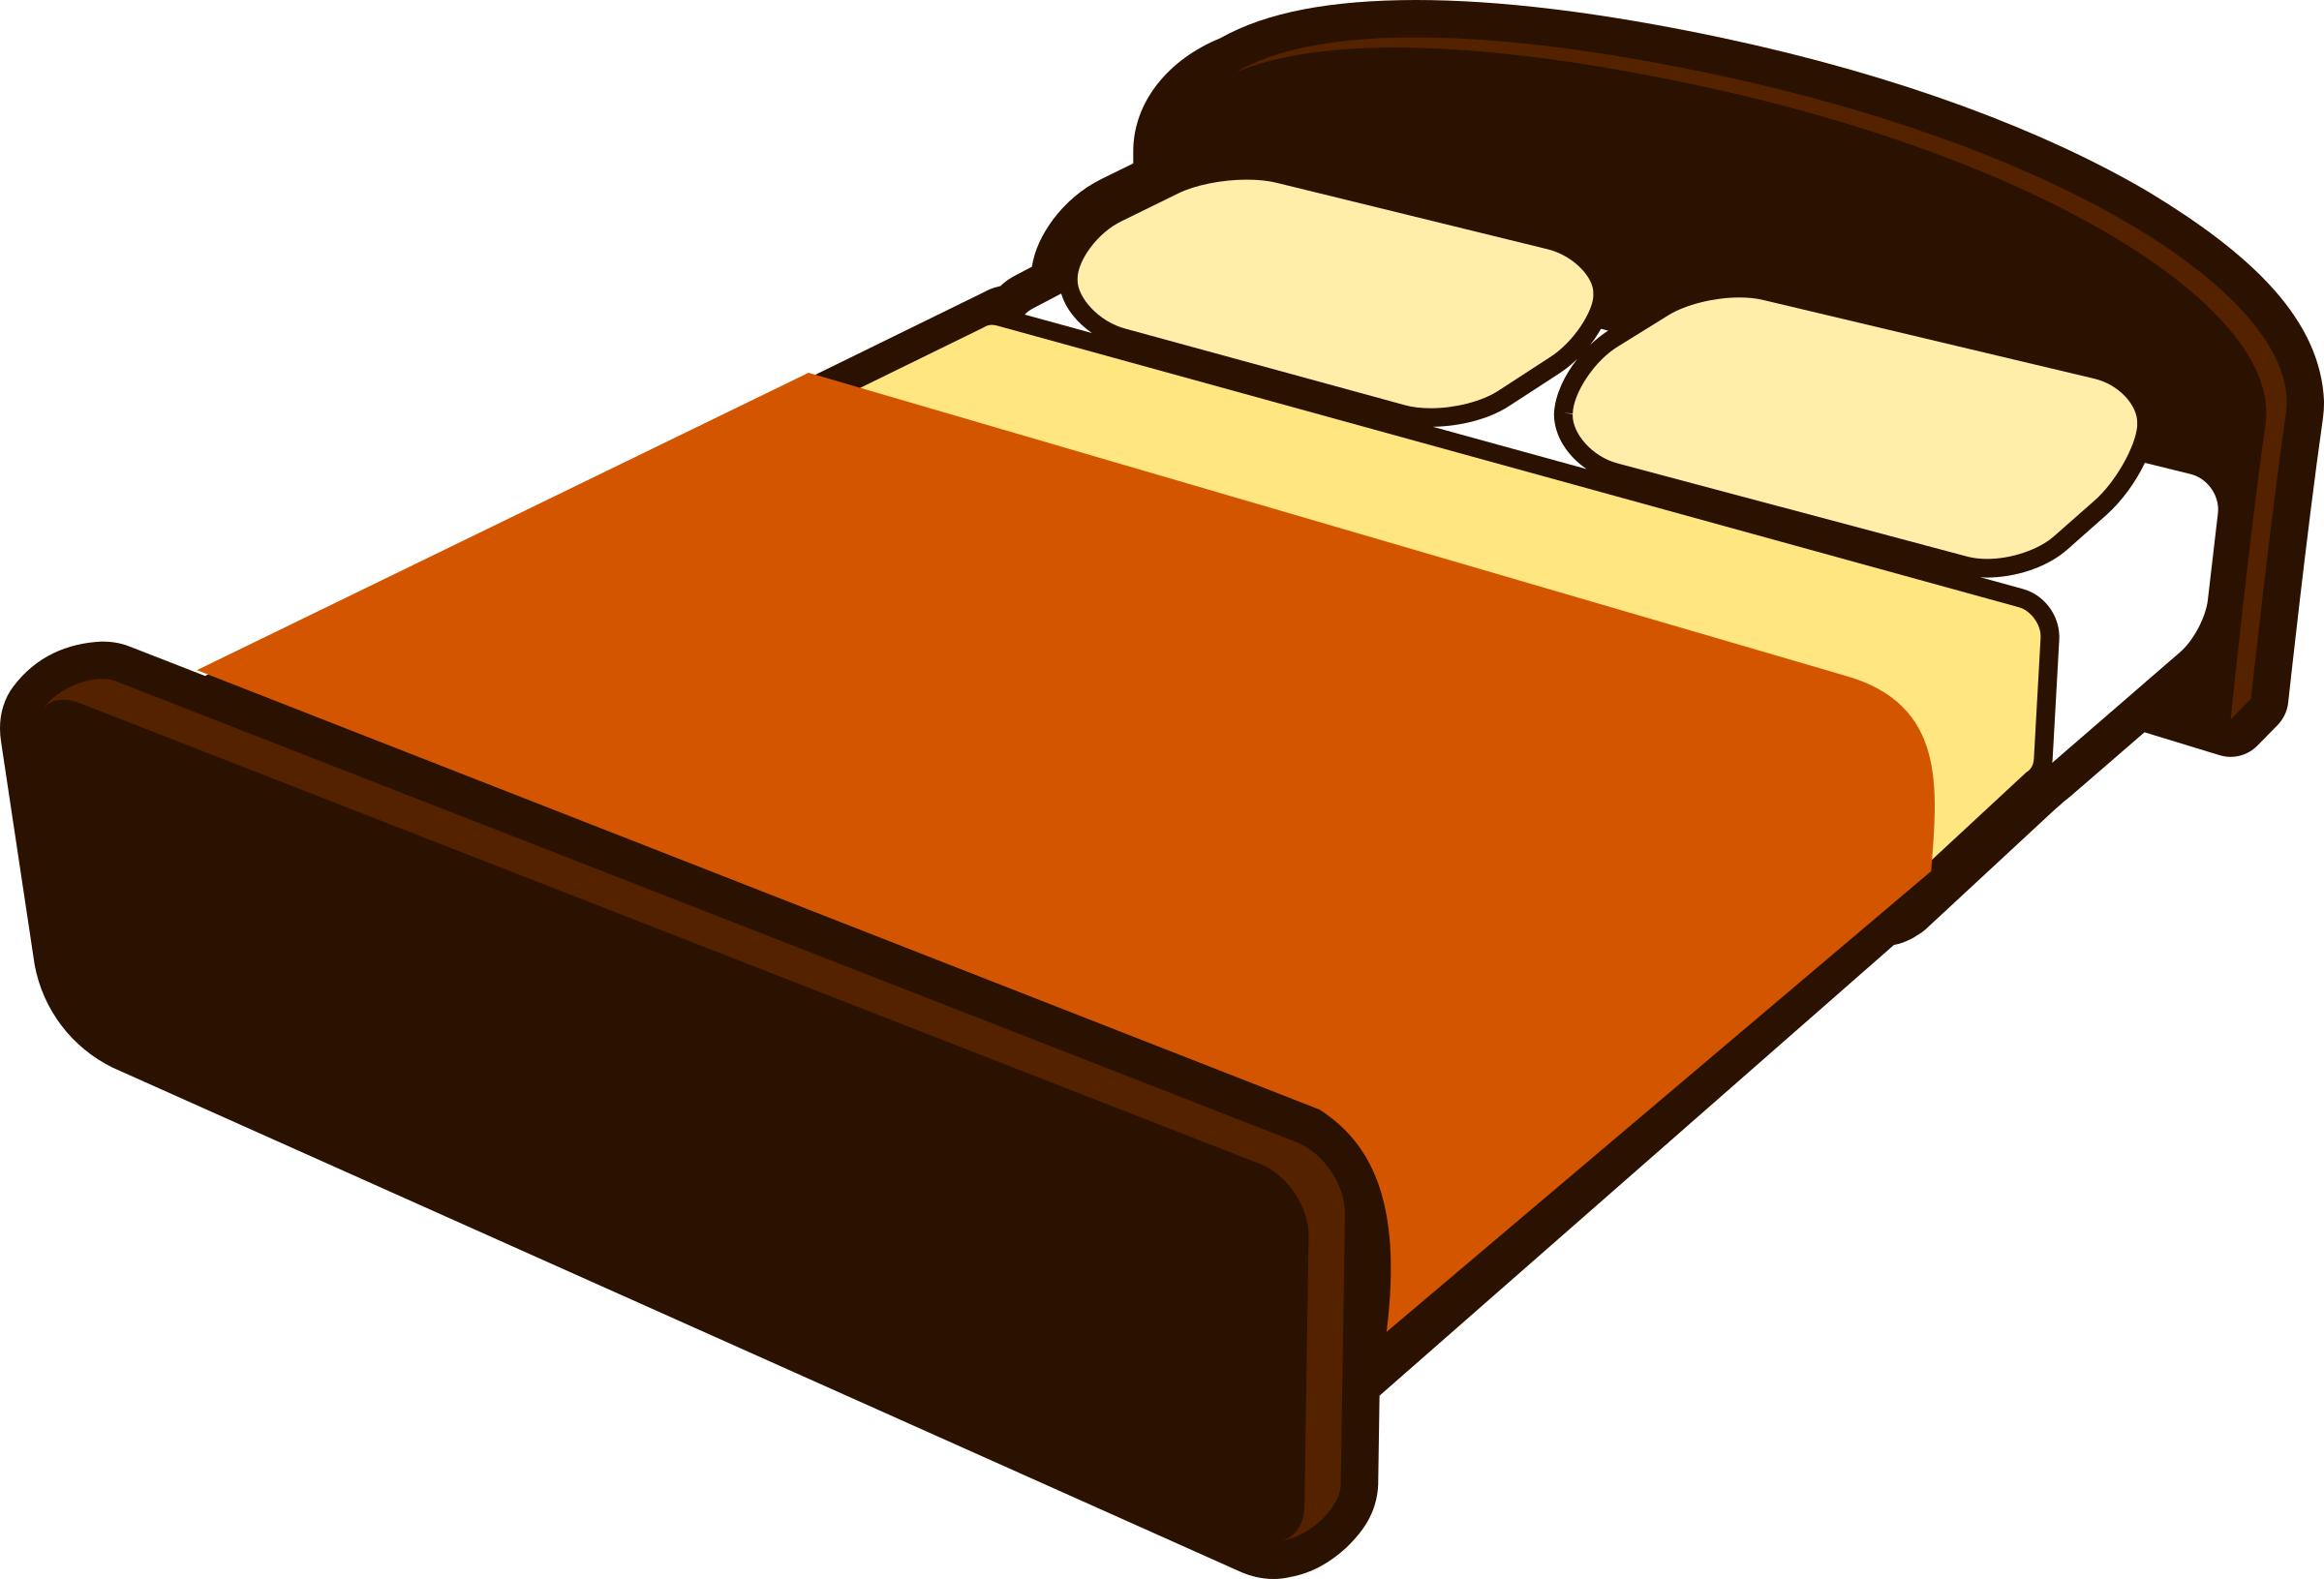 Free Cartoon Bed Png, Download Free Cartoon Bed Png png images, Free